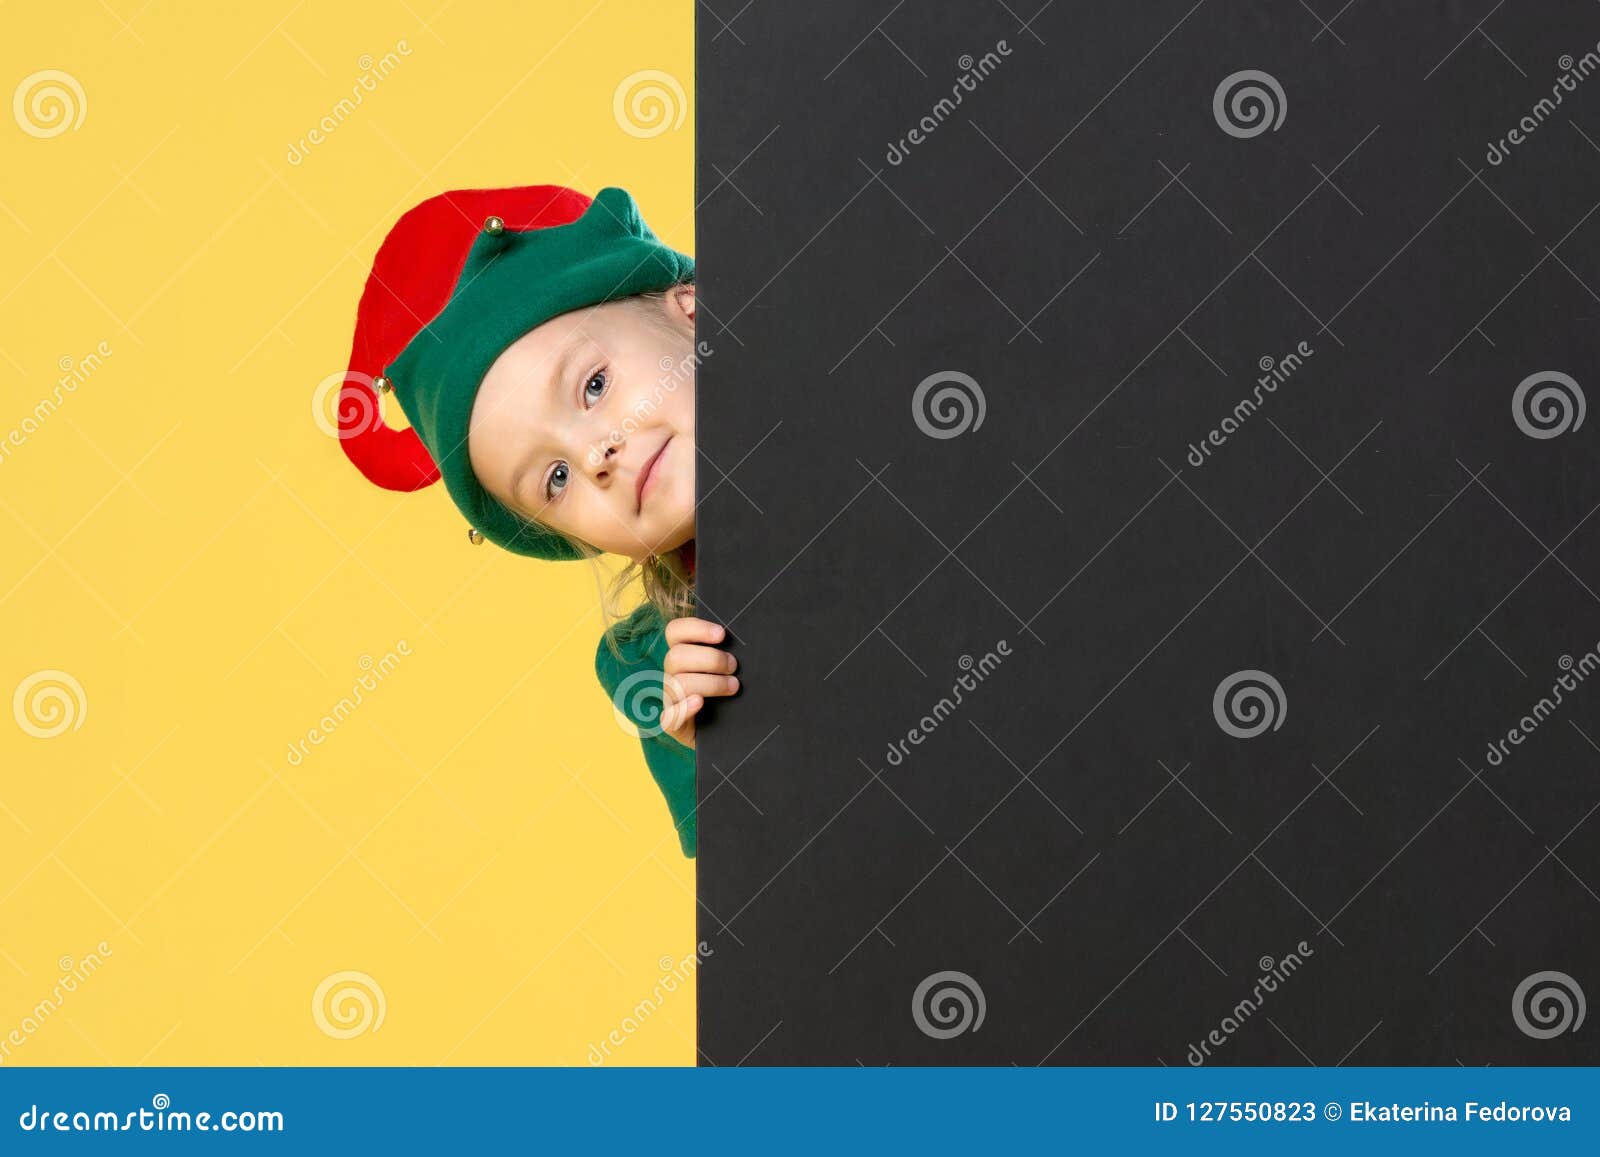 Little Girl In A Christmas Elf Costume On A Yellow